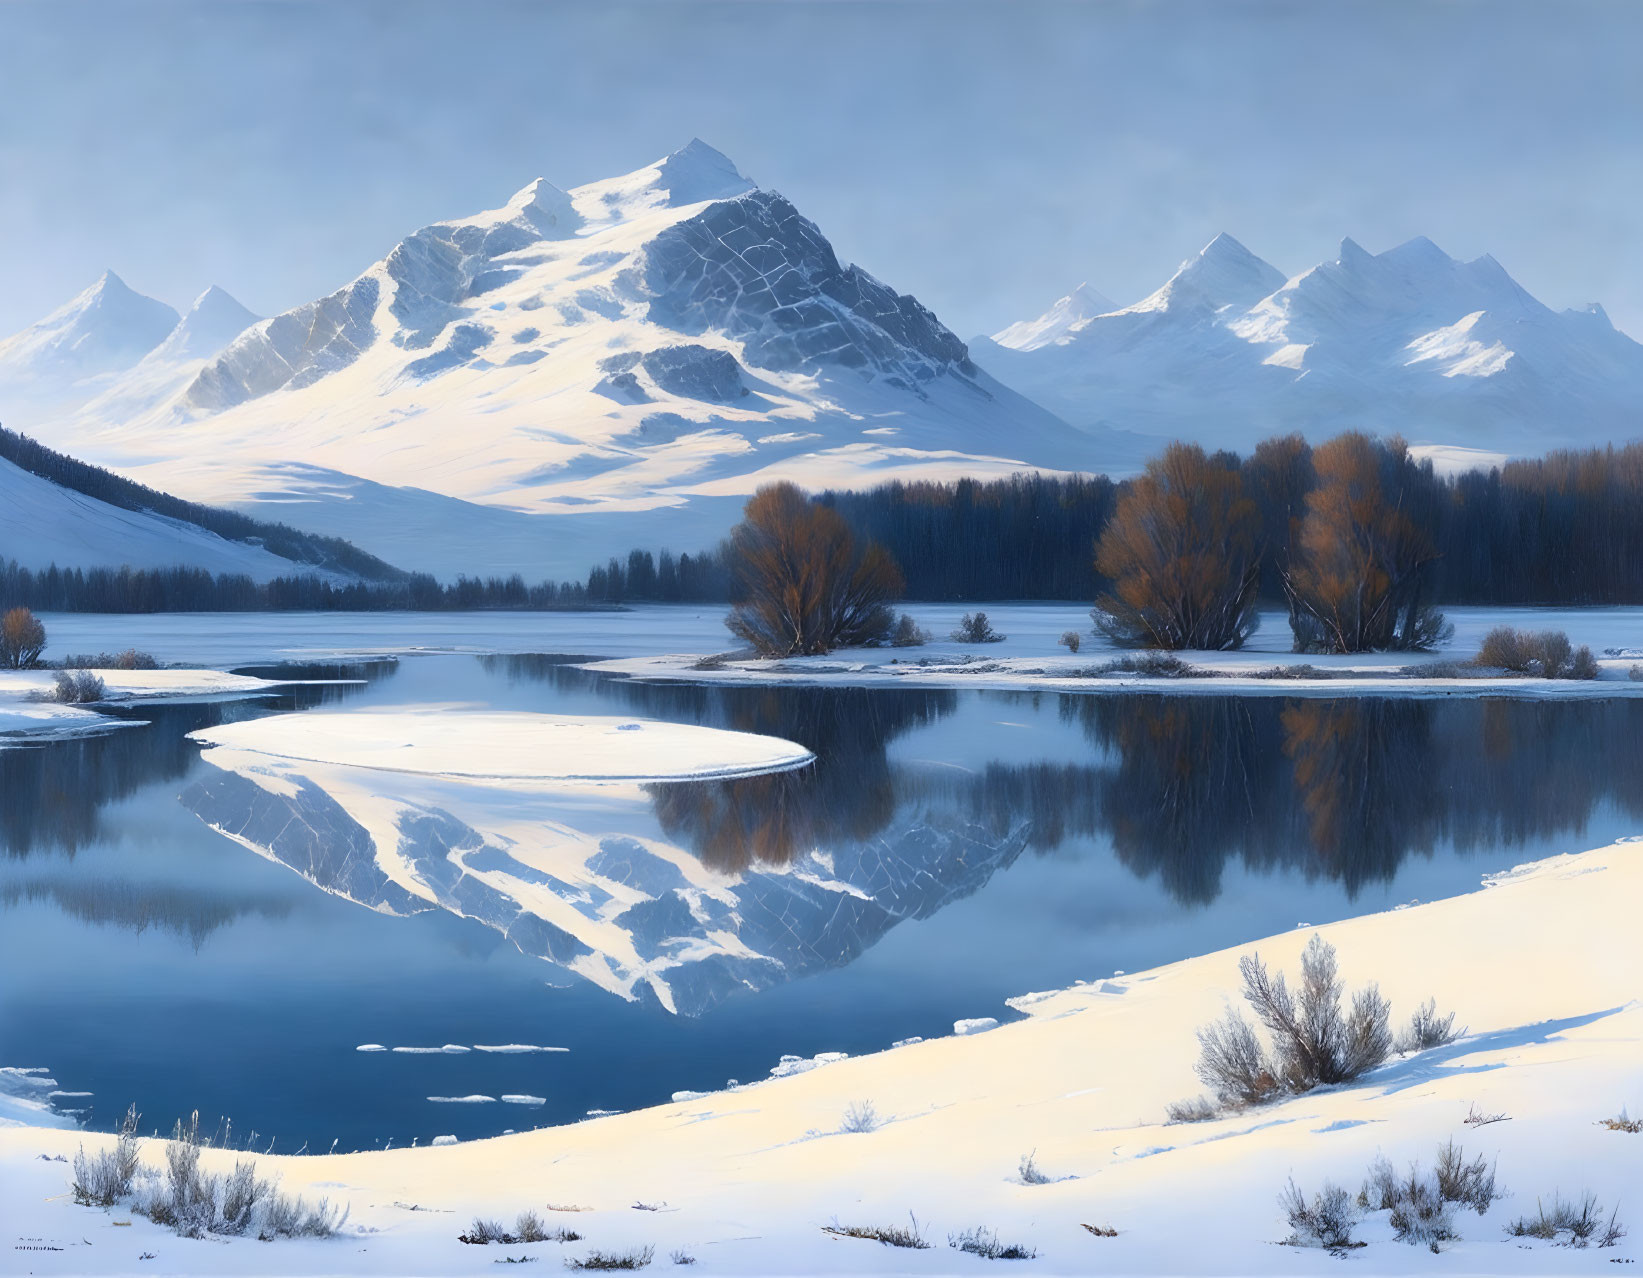 Snow-covered mountains and calm river in tranquil winter scene